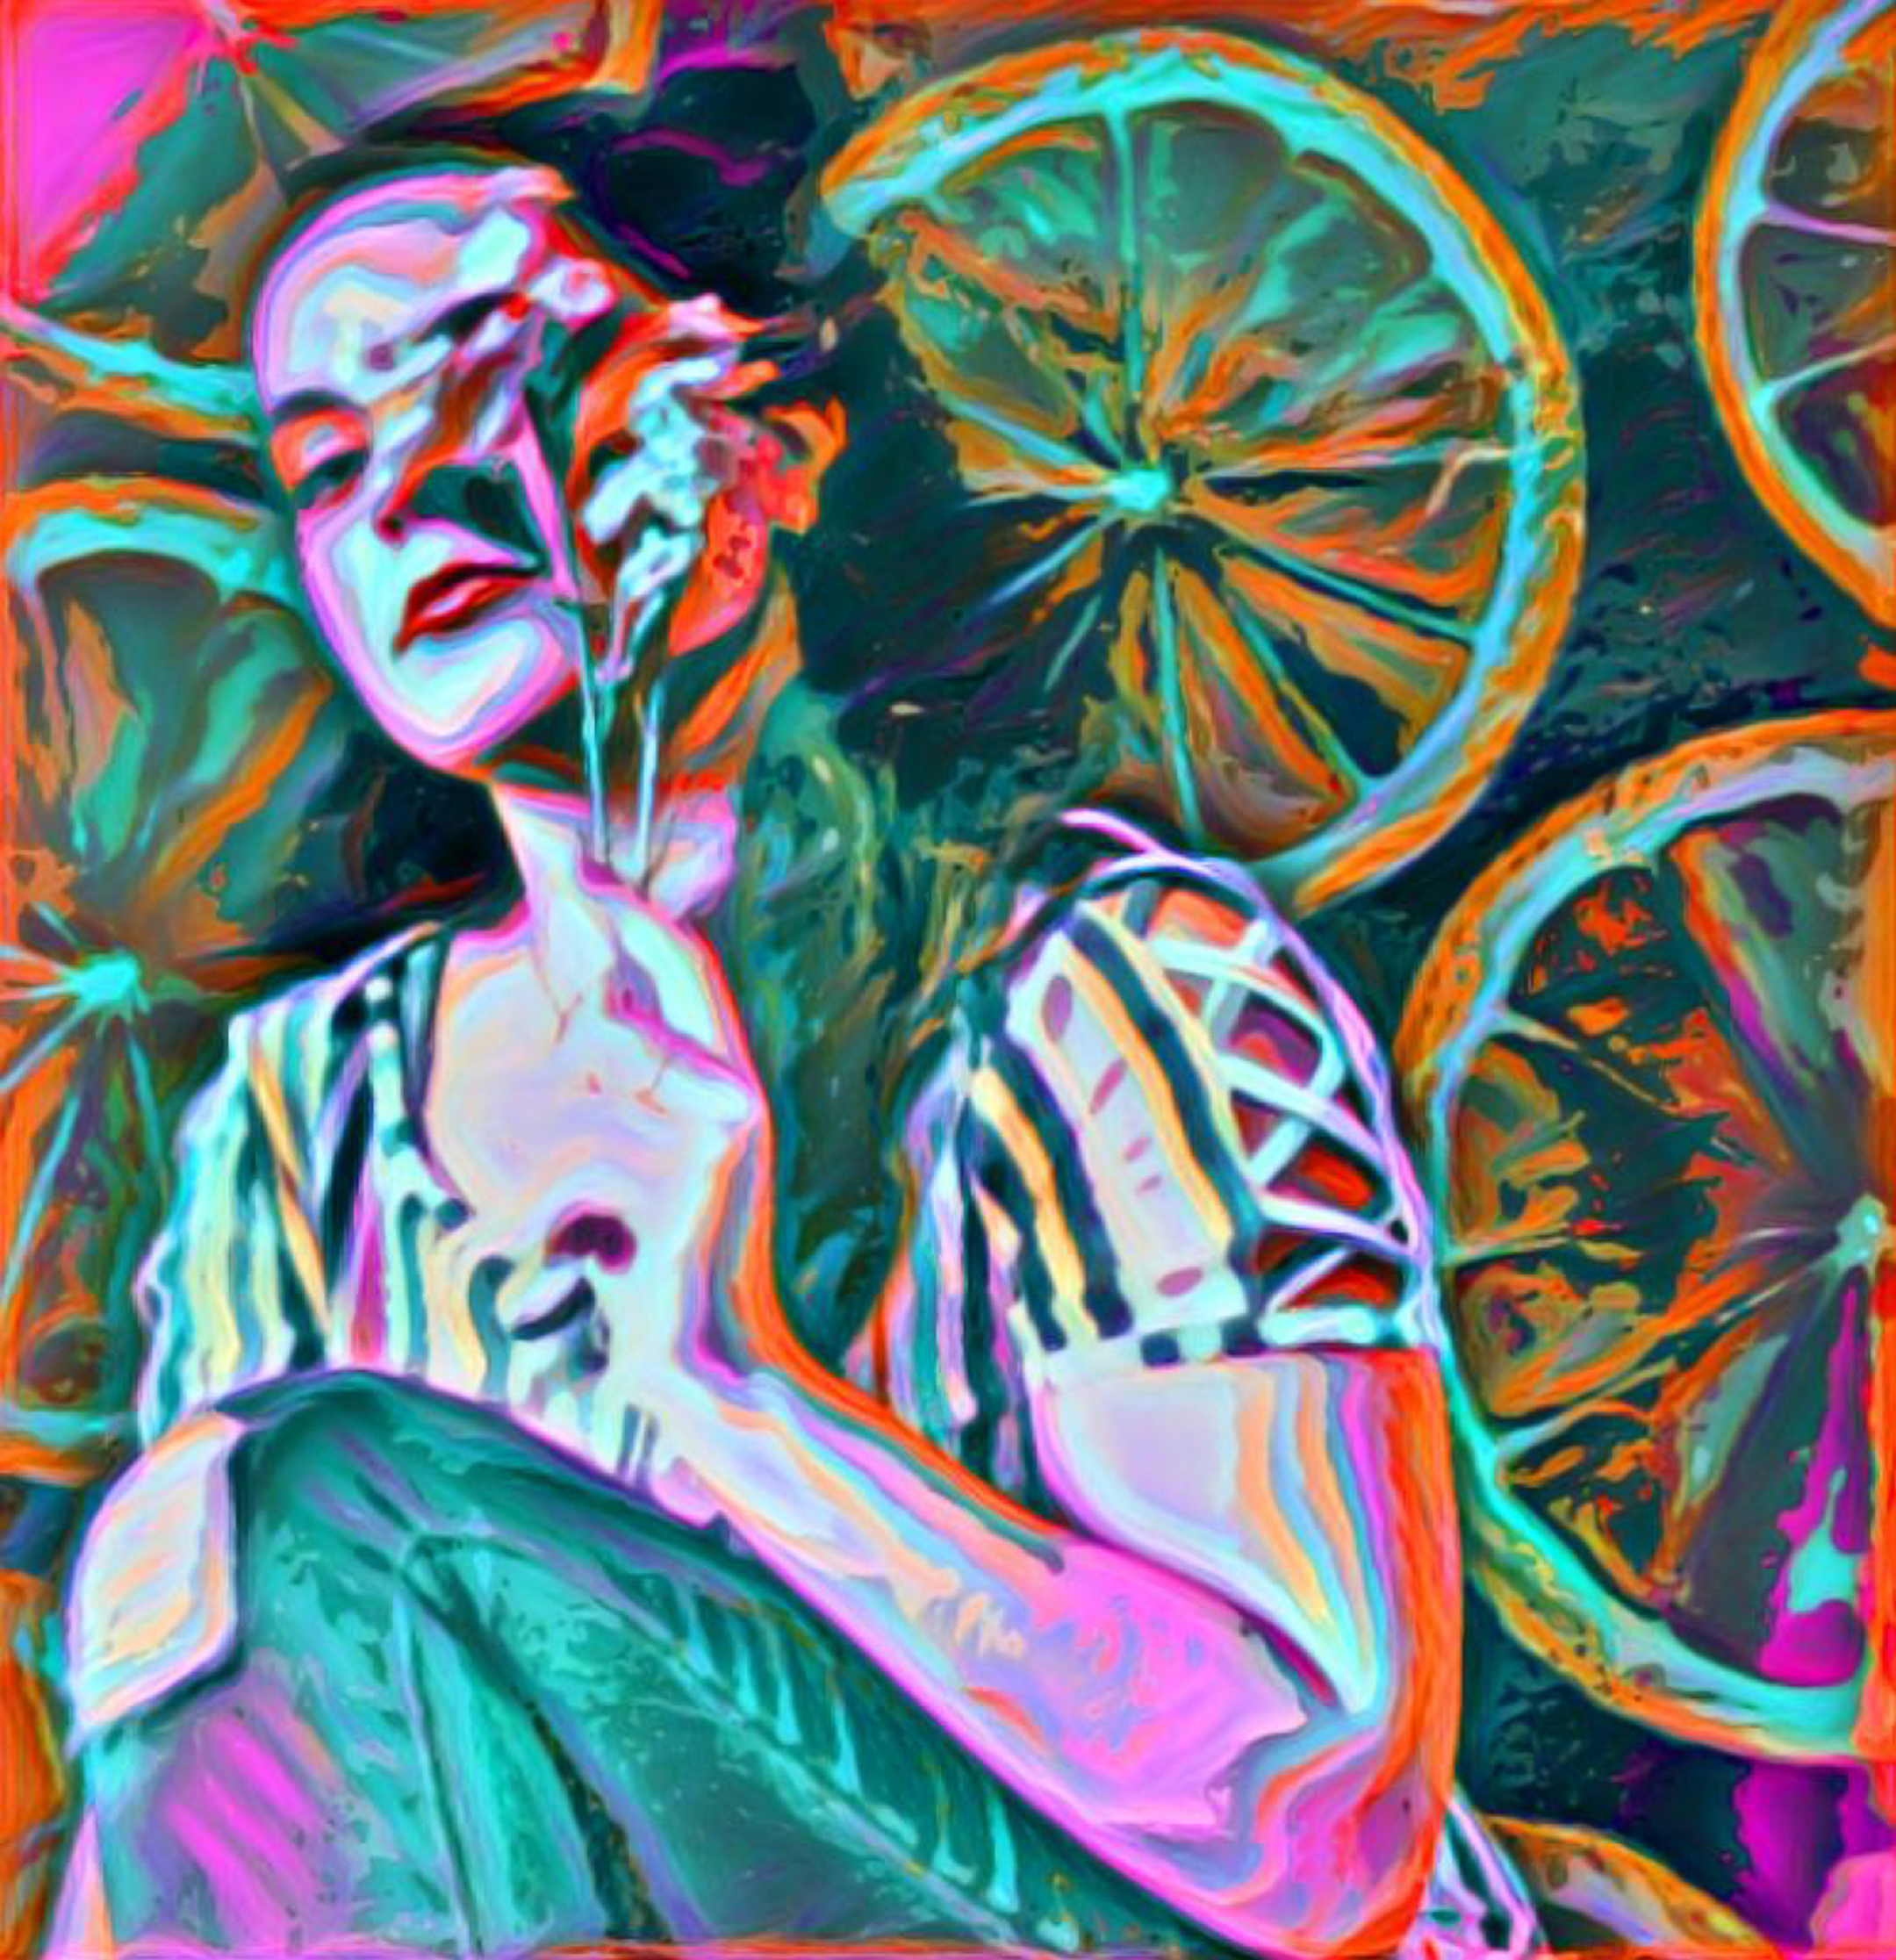 Image of a young woman, crouching on the left, painted in blues, greens, and purples, against a stylized background of orange slices in green and purple